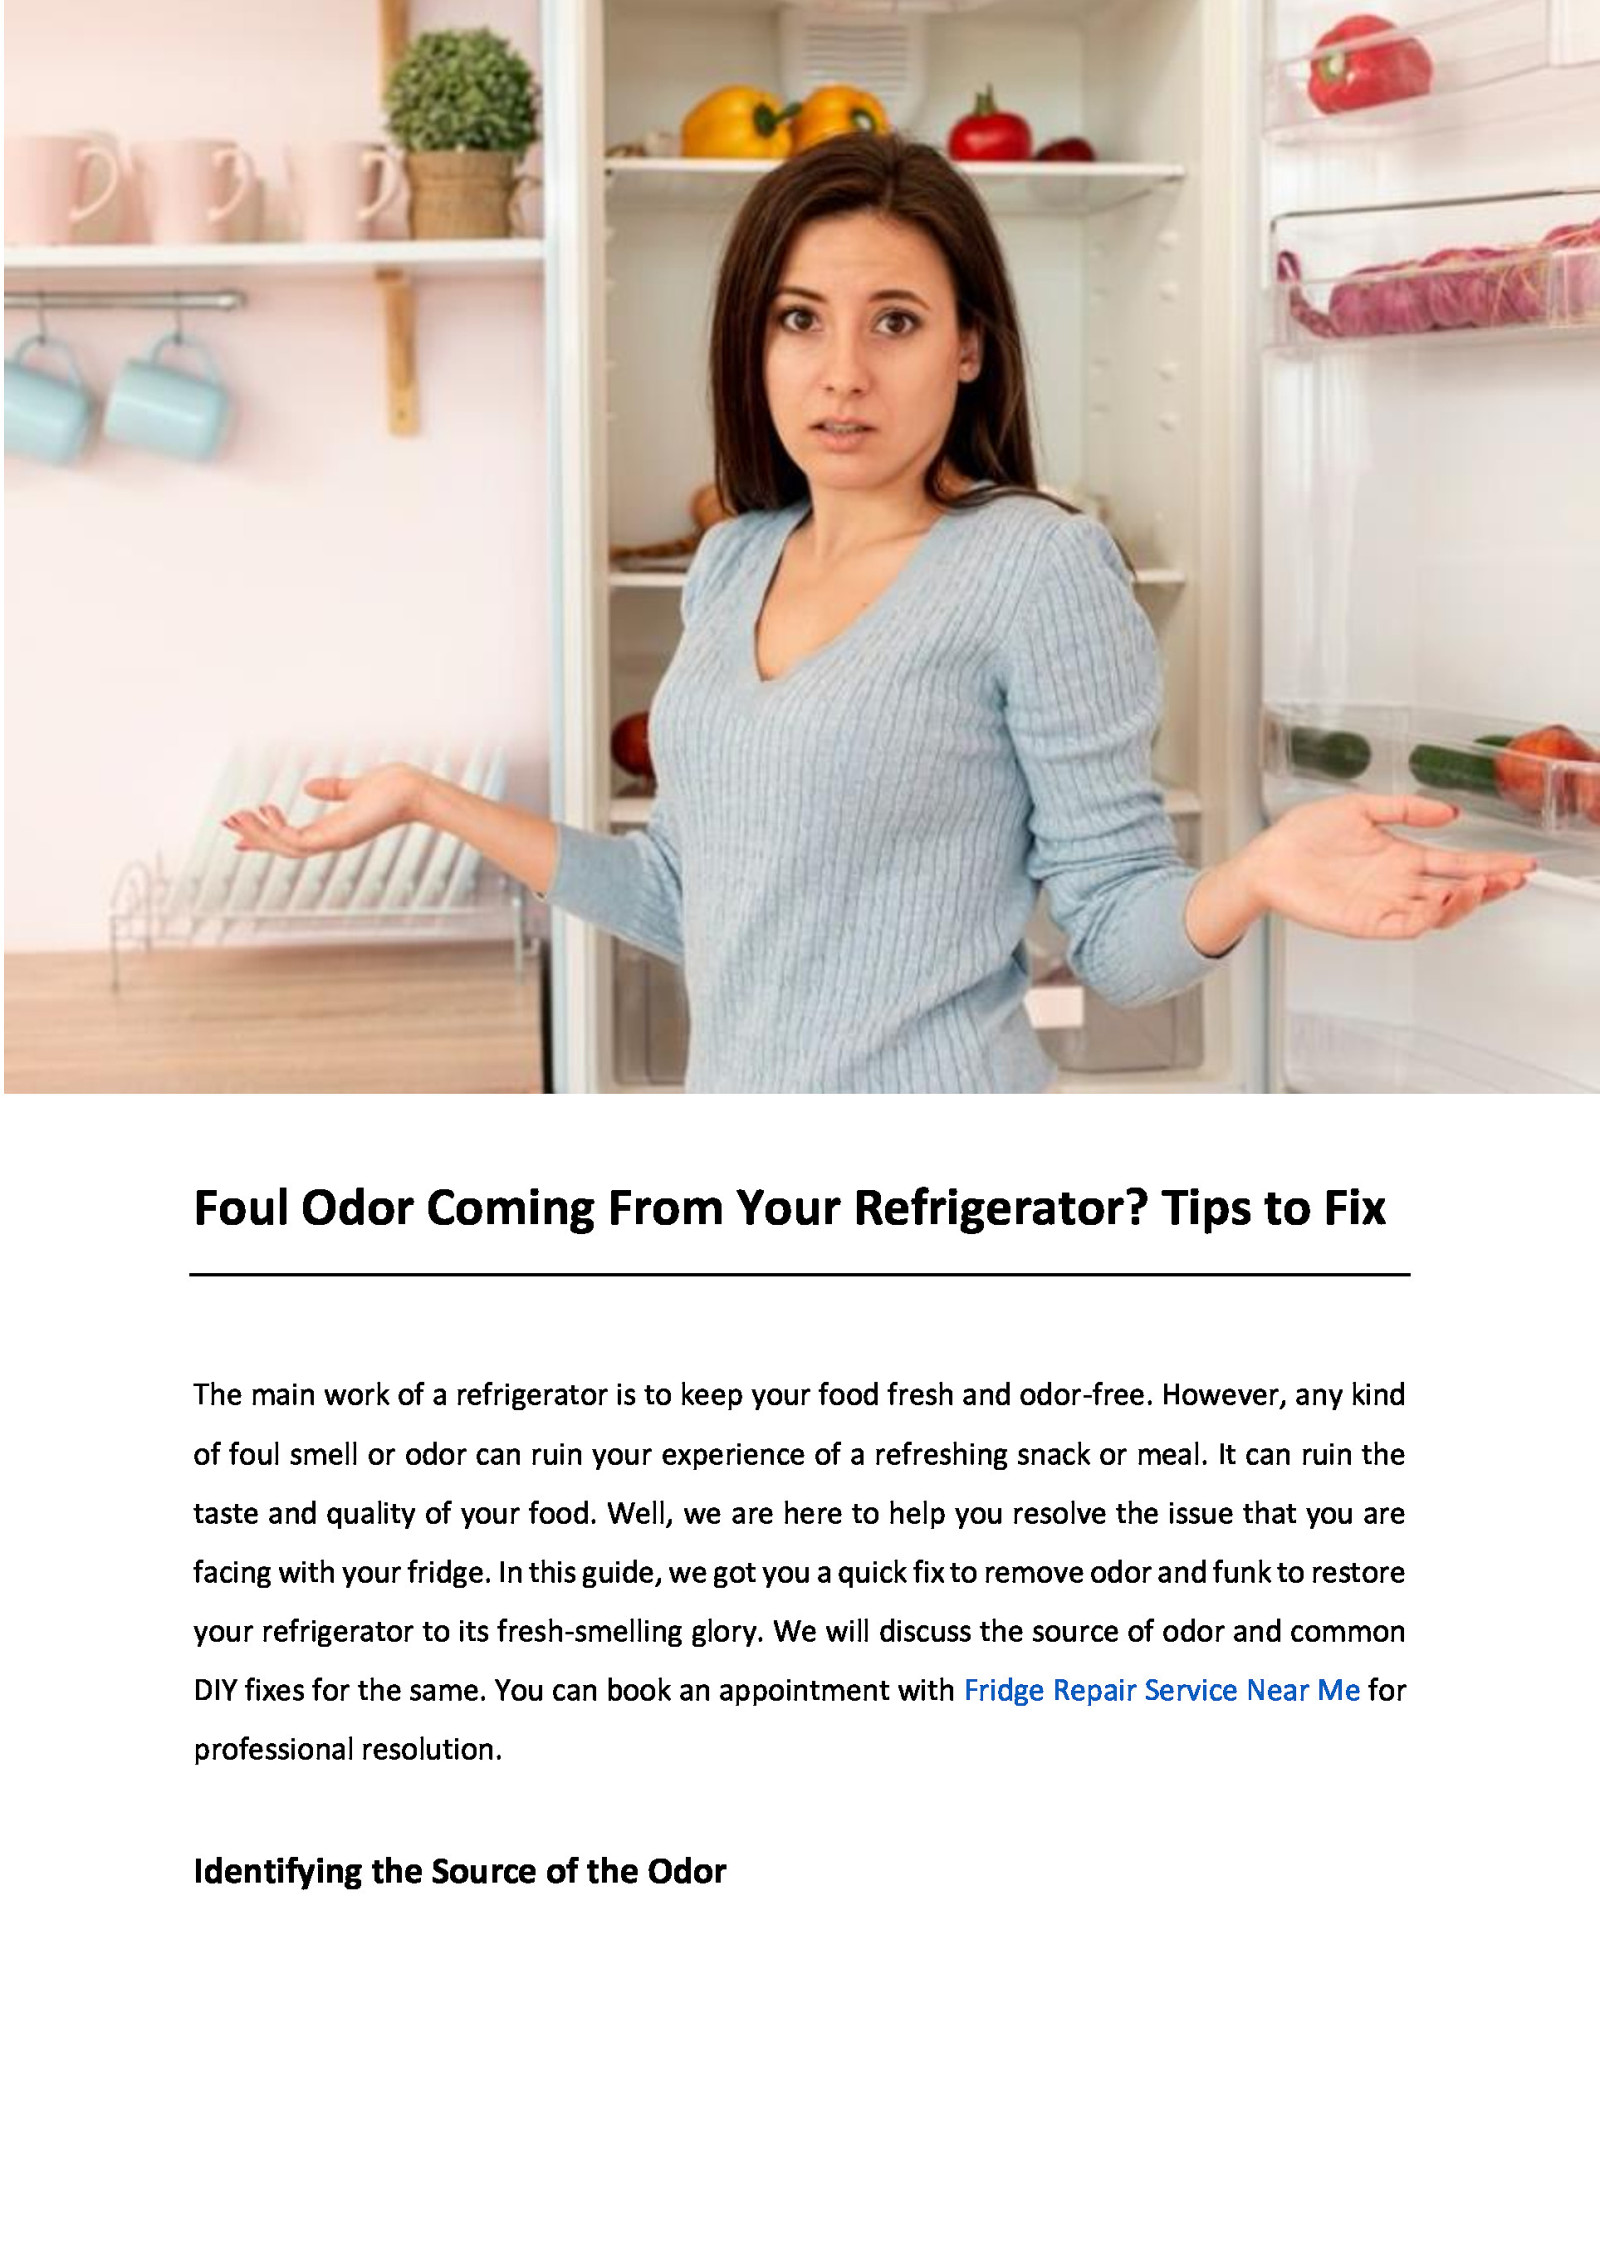 Foul Odor Coming From Your Refrigerator? Tips to Fix